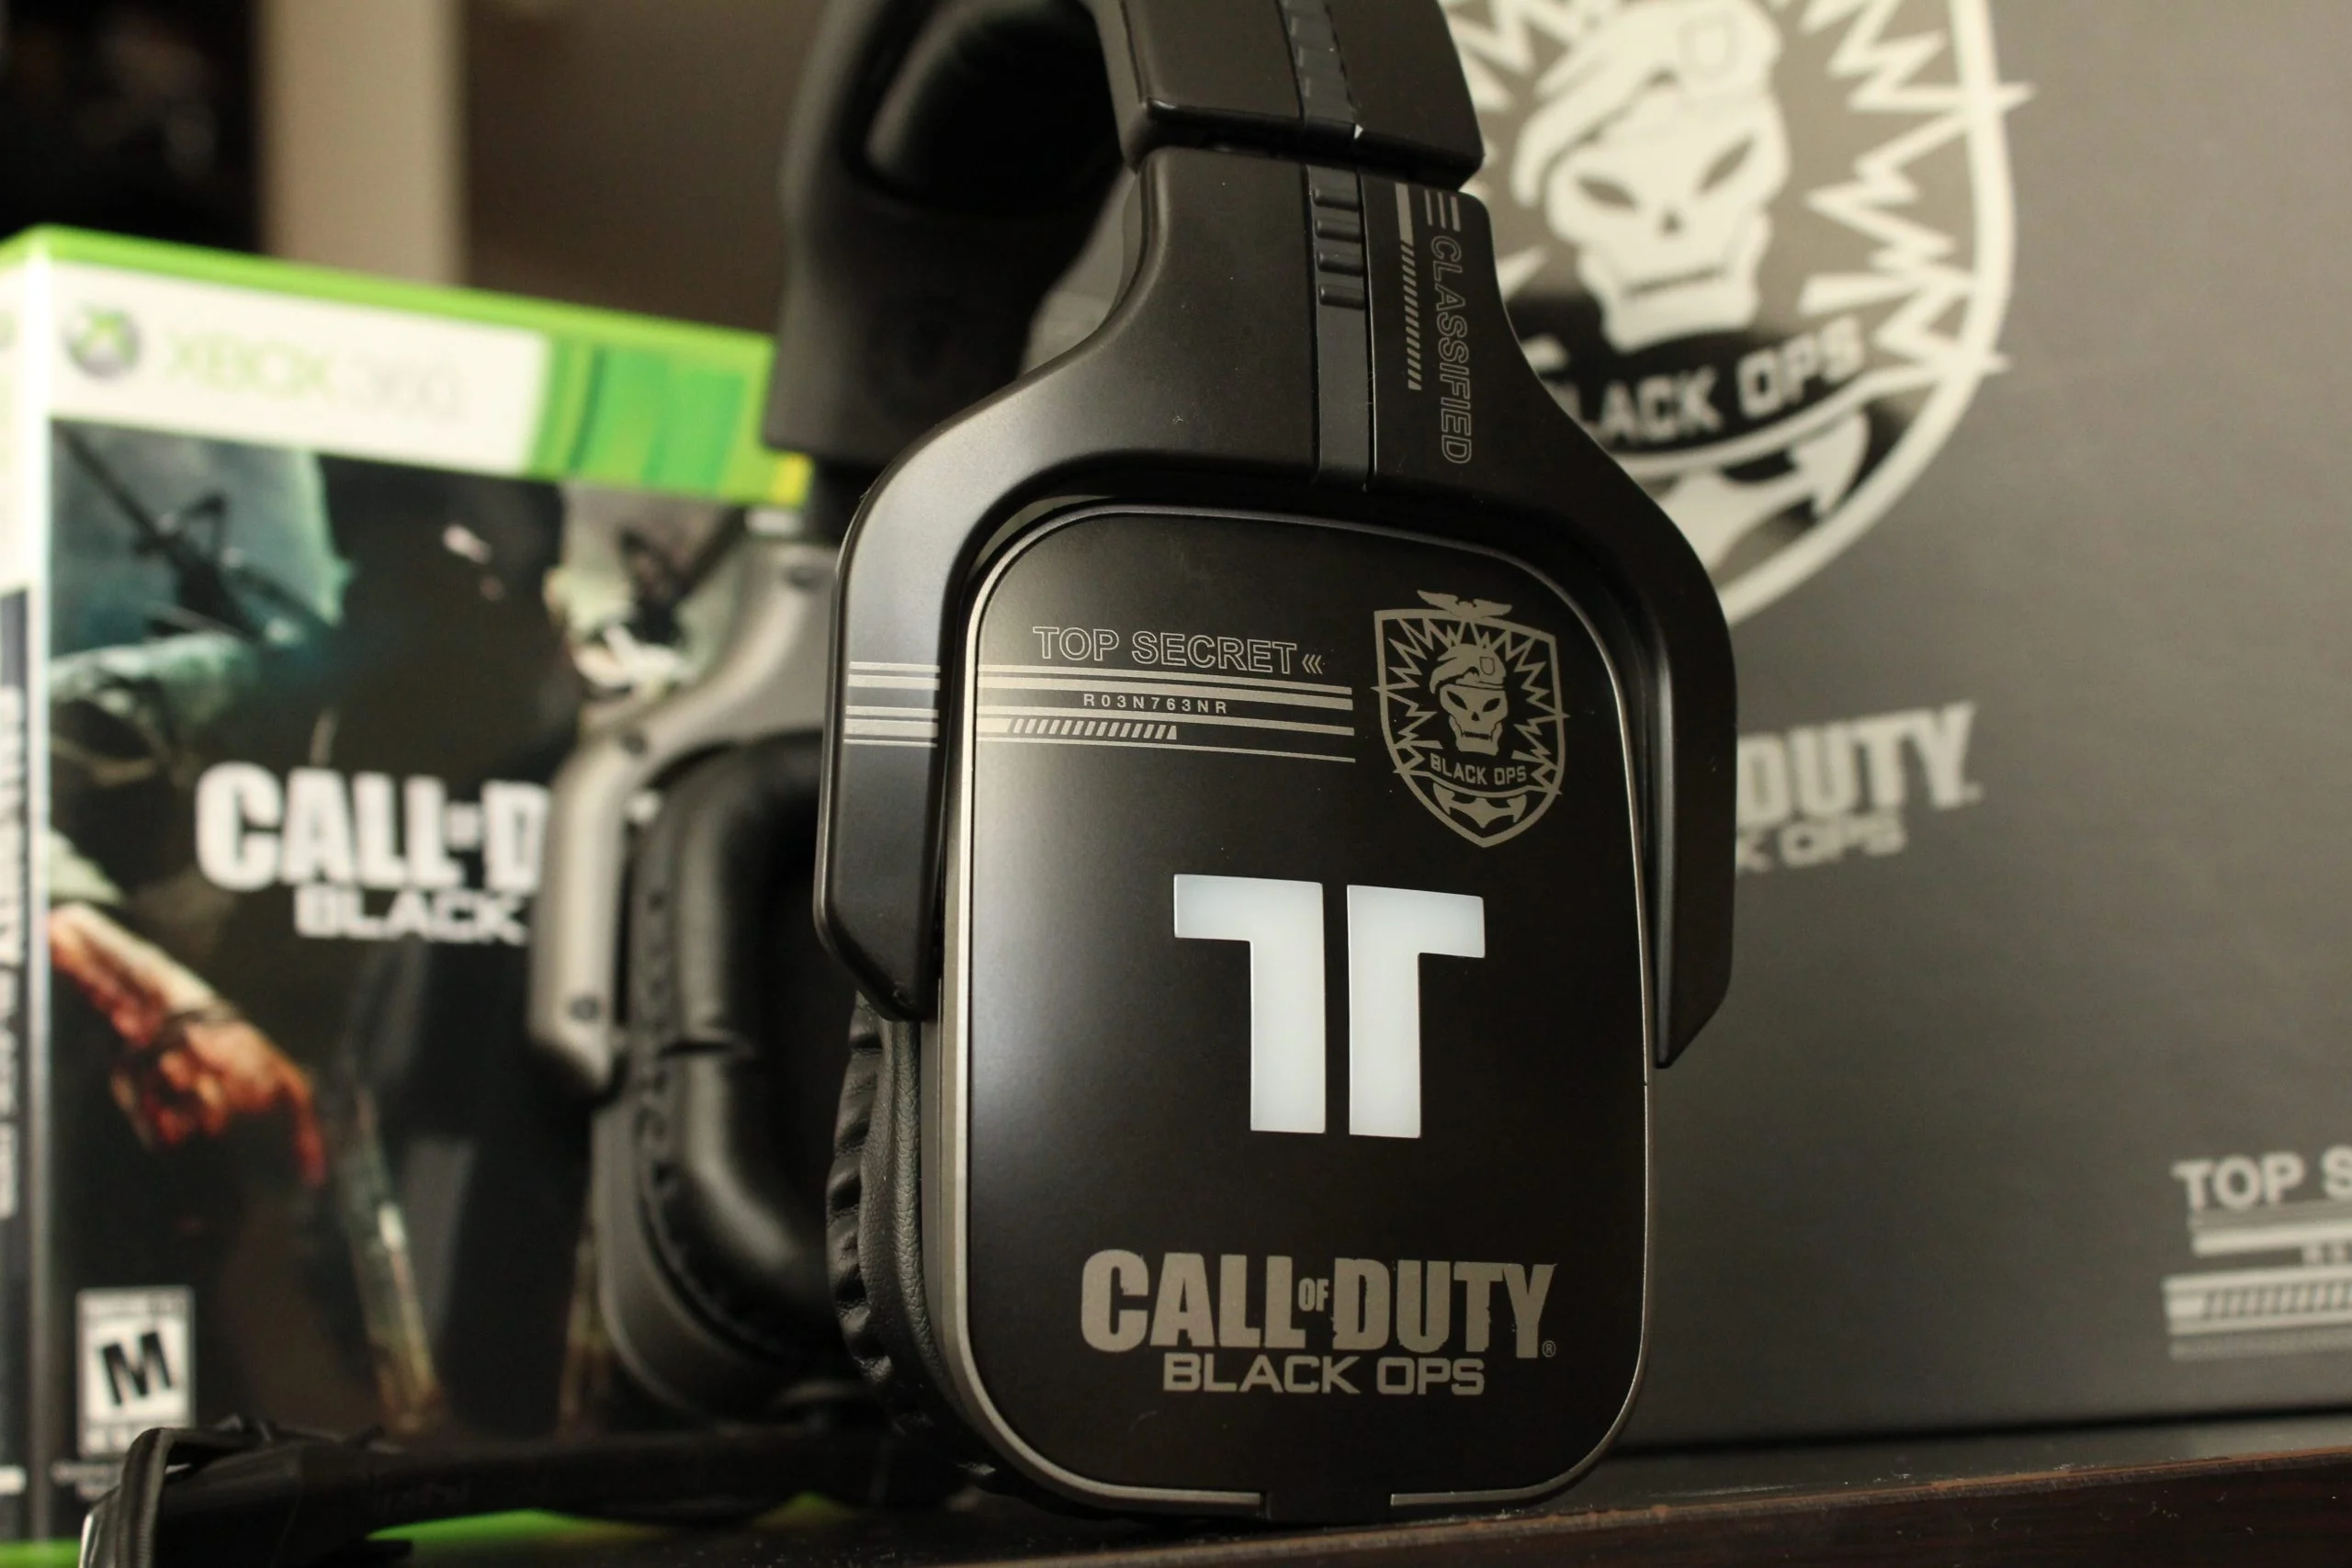 Call of Duty Black Ops Tritton Review – Limited Edition Headset